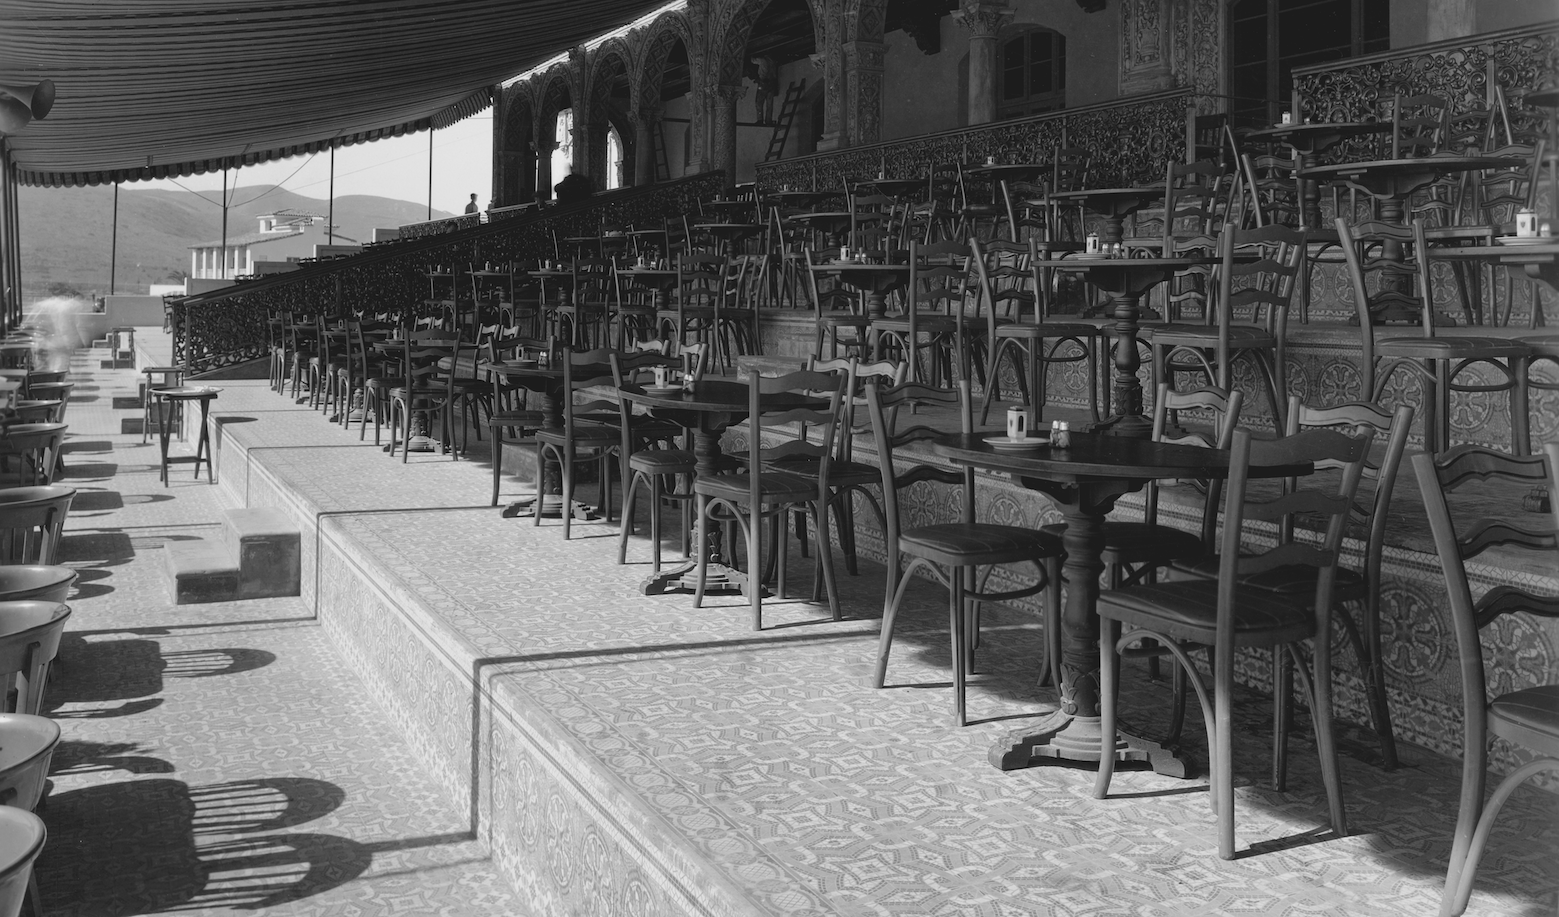 Exquisite: The Jockey Club terrace. Photo: Mott-Merge Collections, California History Room, California State Library